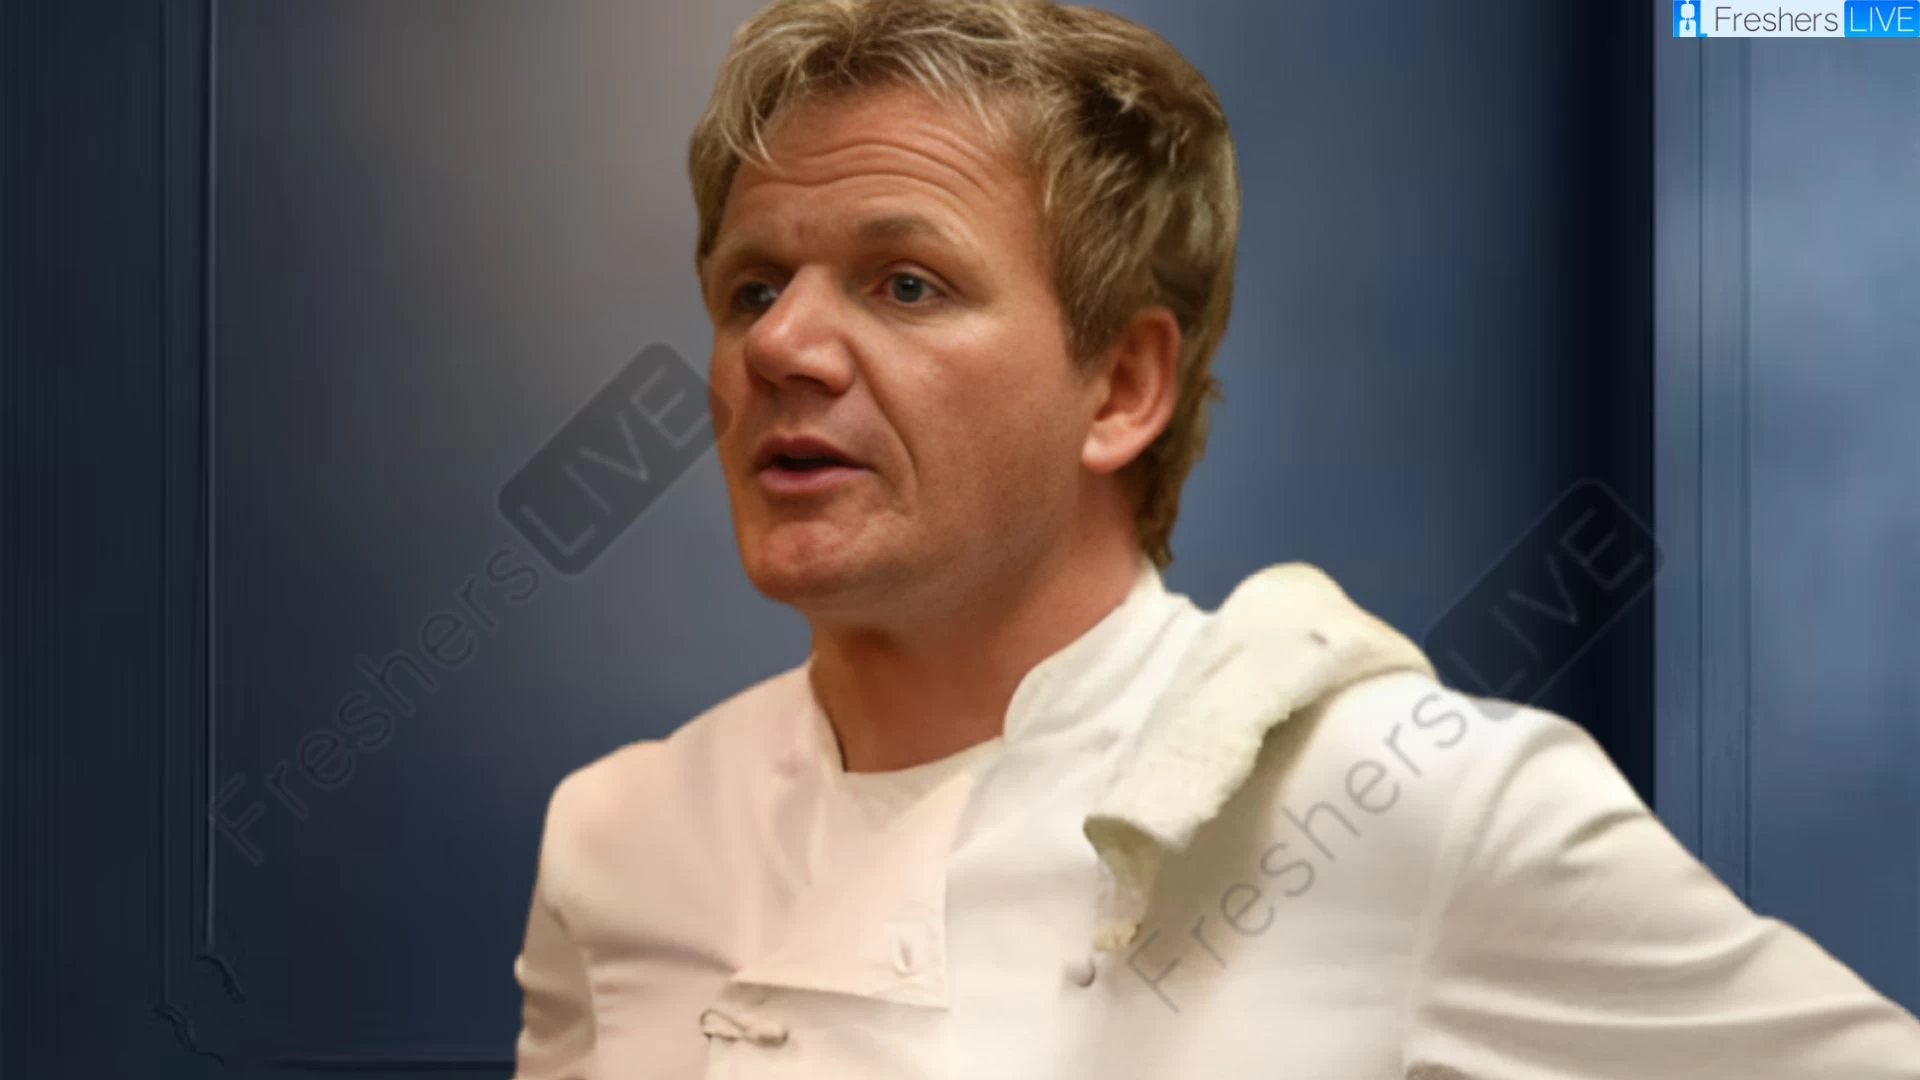 Kitchen Nightmares Season 8 Episode 3 Release Date and Time, Countdown, When is it Coming Out?